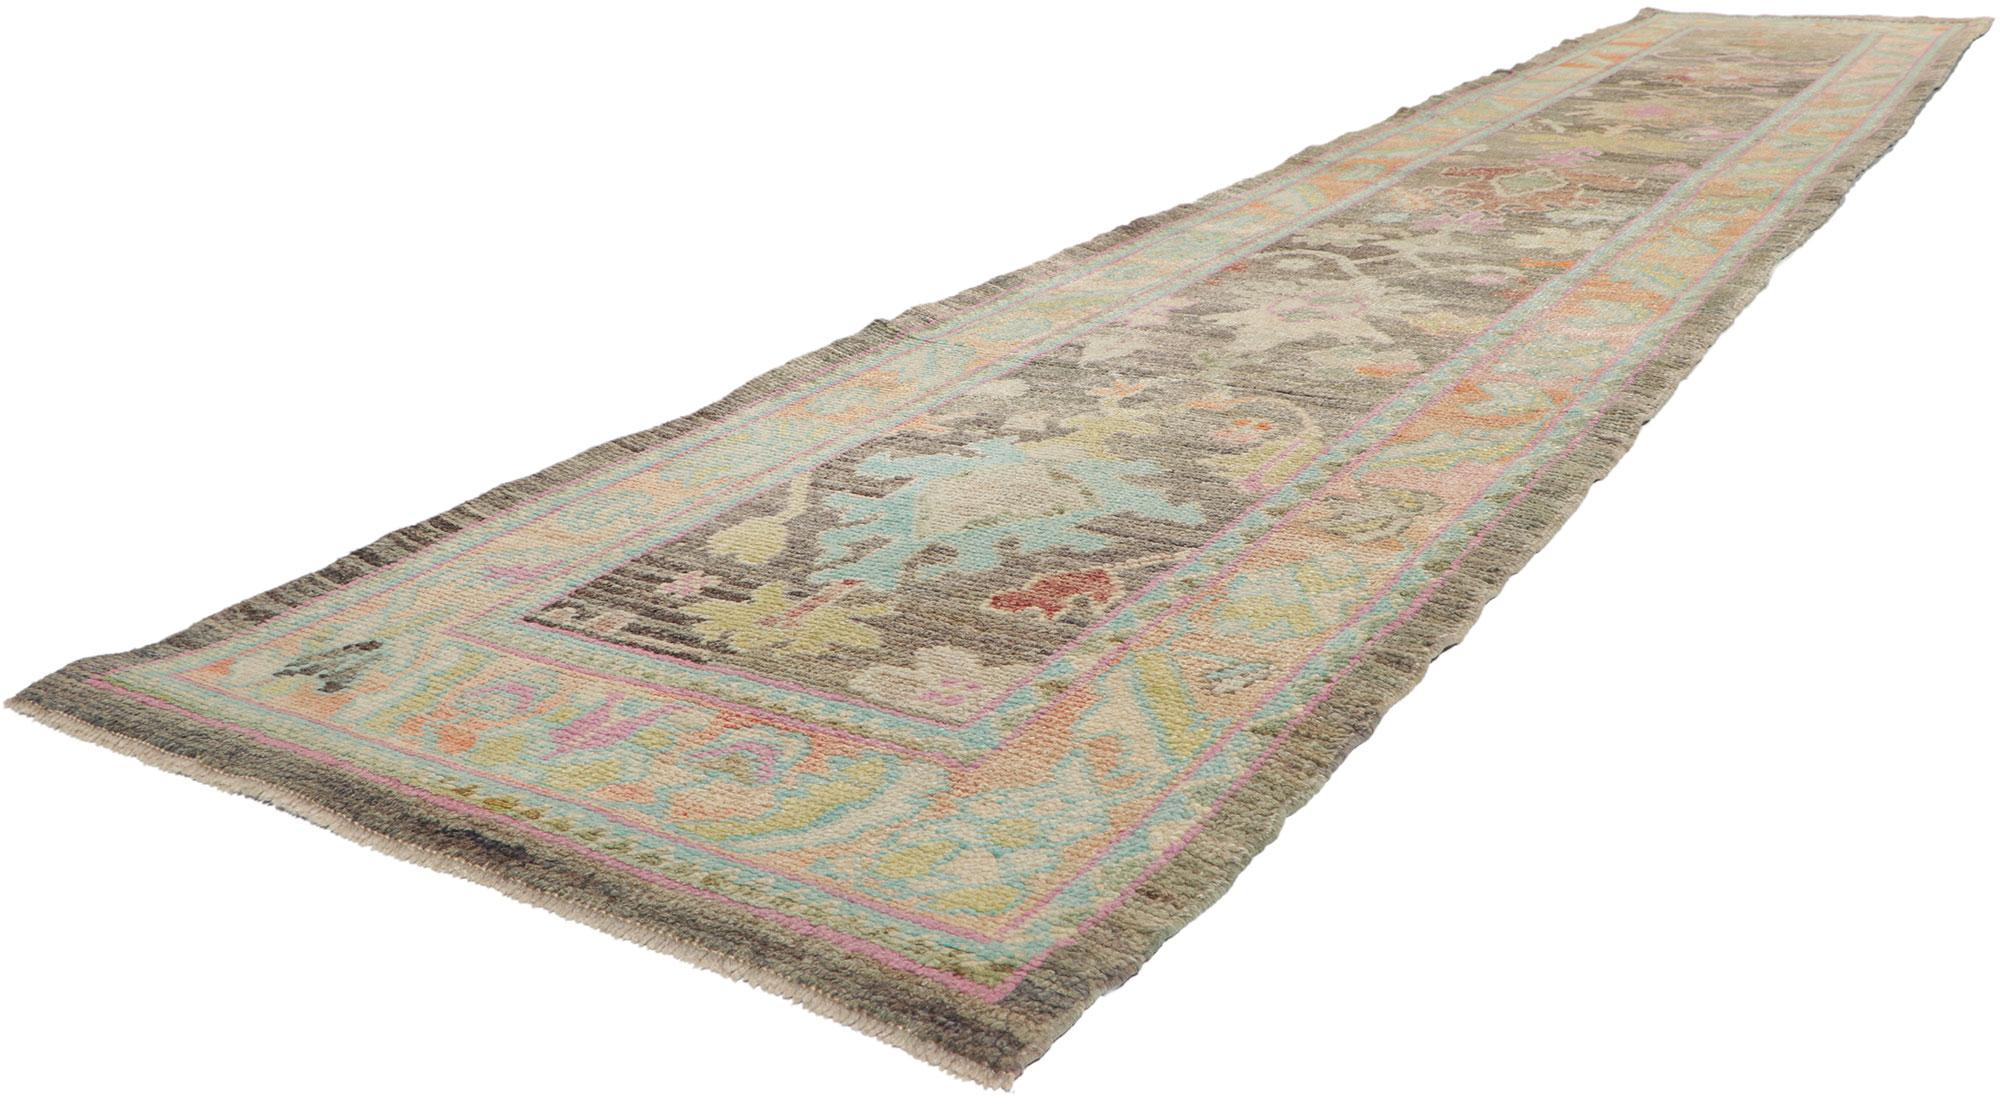 53805 New Modern Style Turkish Oushak hallway runner 02'11 x 15'10. This hand-knotted wool contemporary Turkish Oushak runner features an all-over botanical pattern composed of amorphous organic motifs spread across the striated taupe colored field.